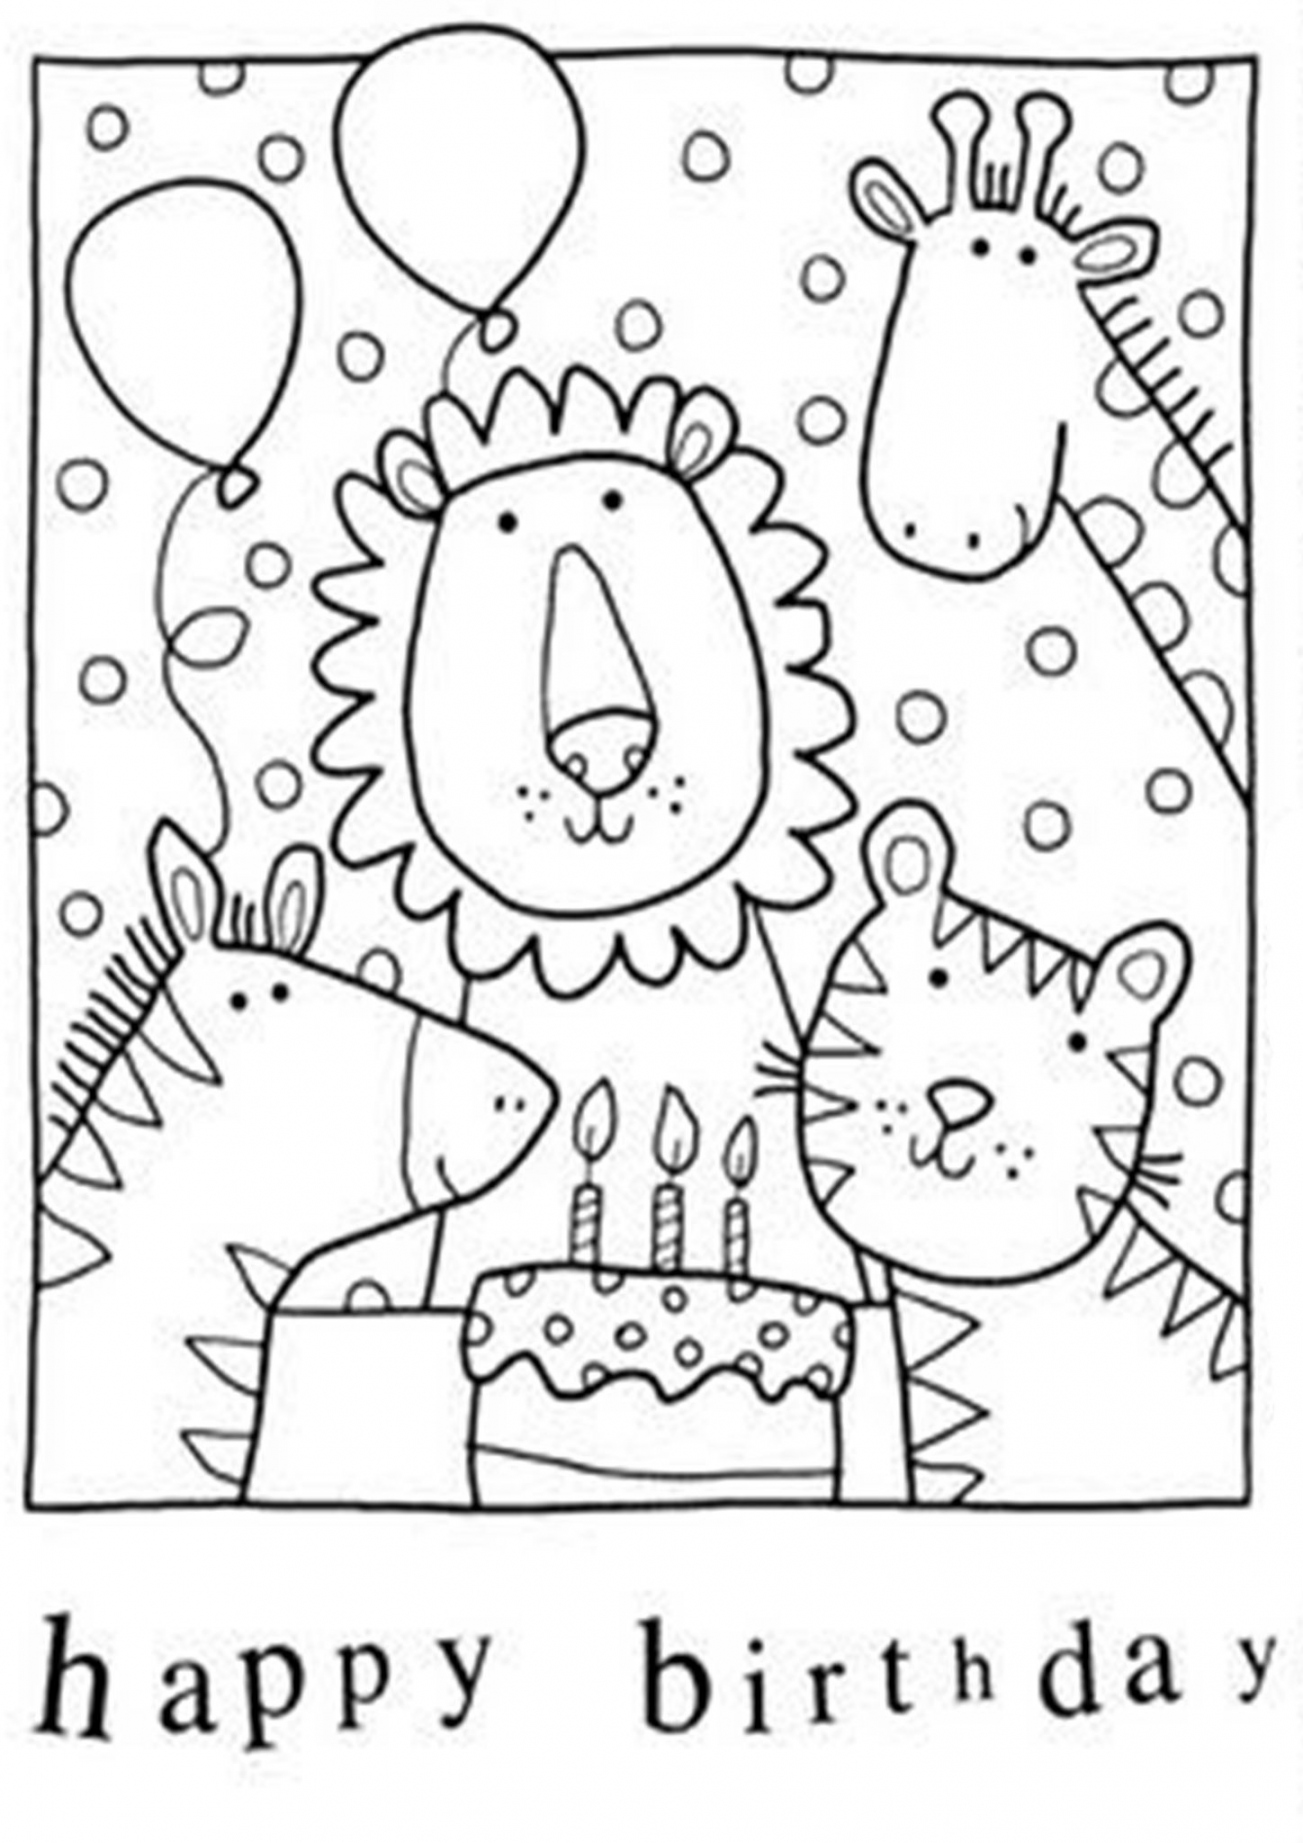 Free Printable Happy Birthday Coloring Page - Printable - Pin on Colour pages